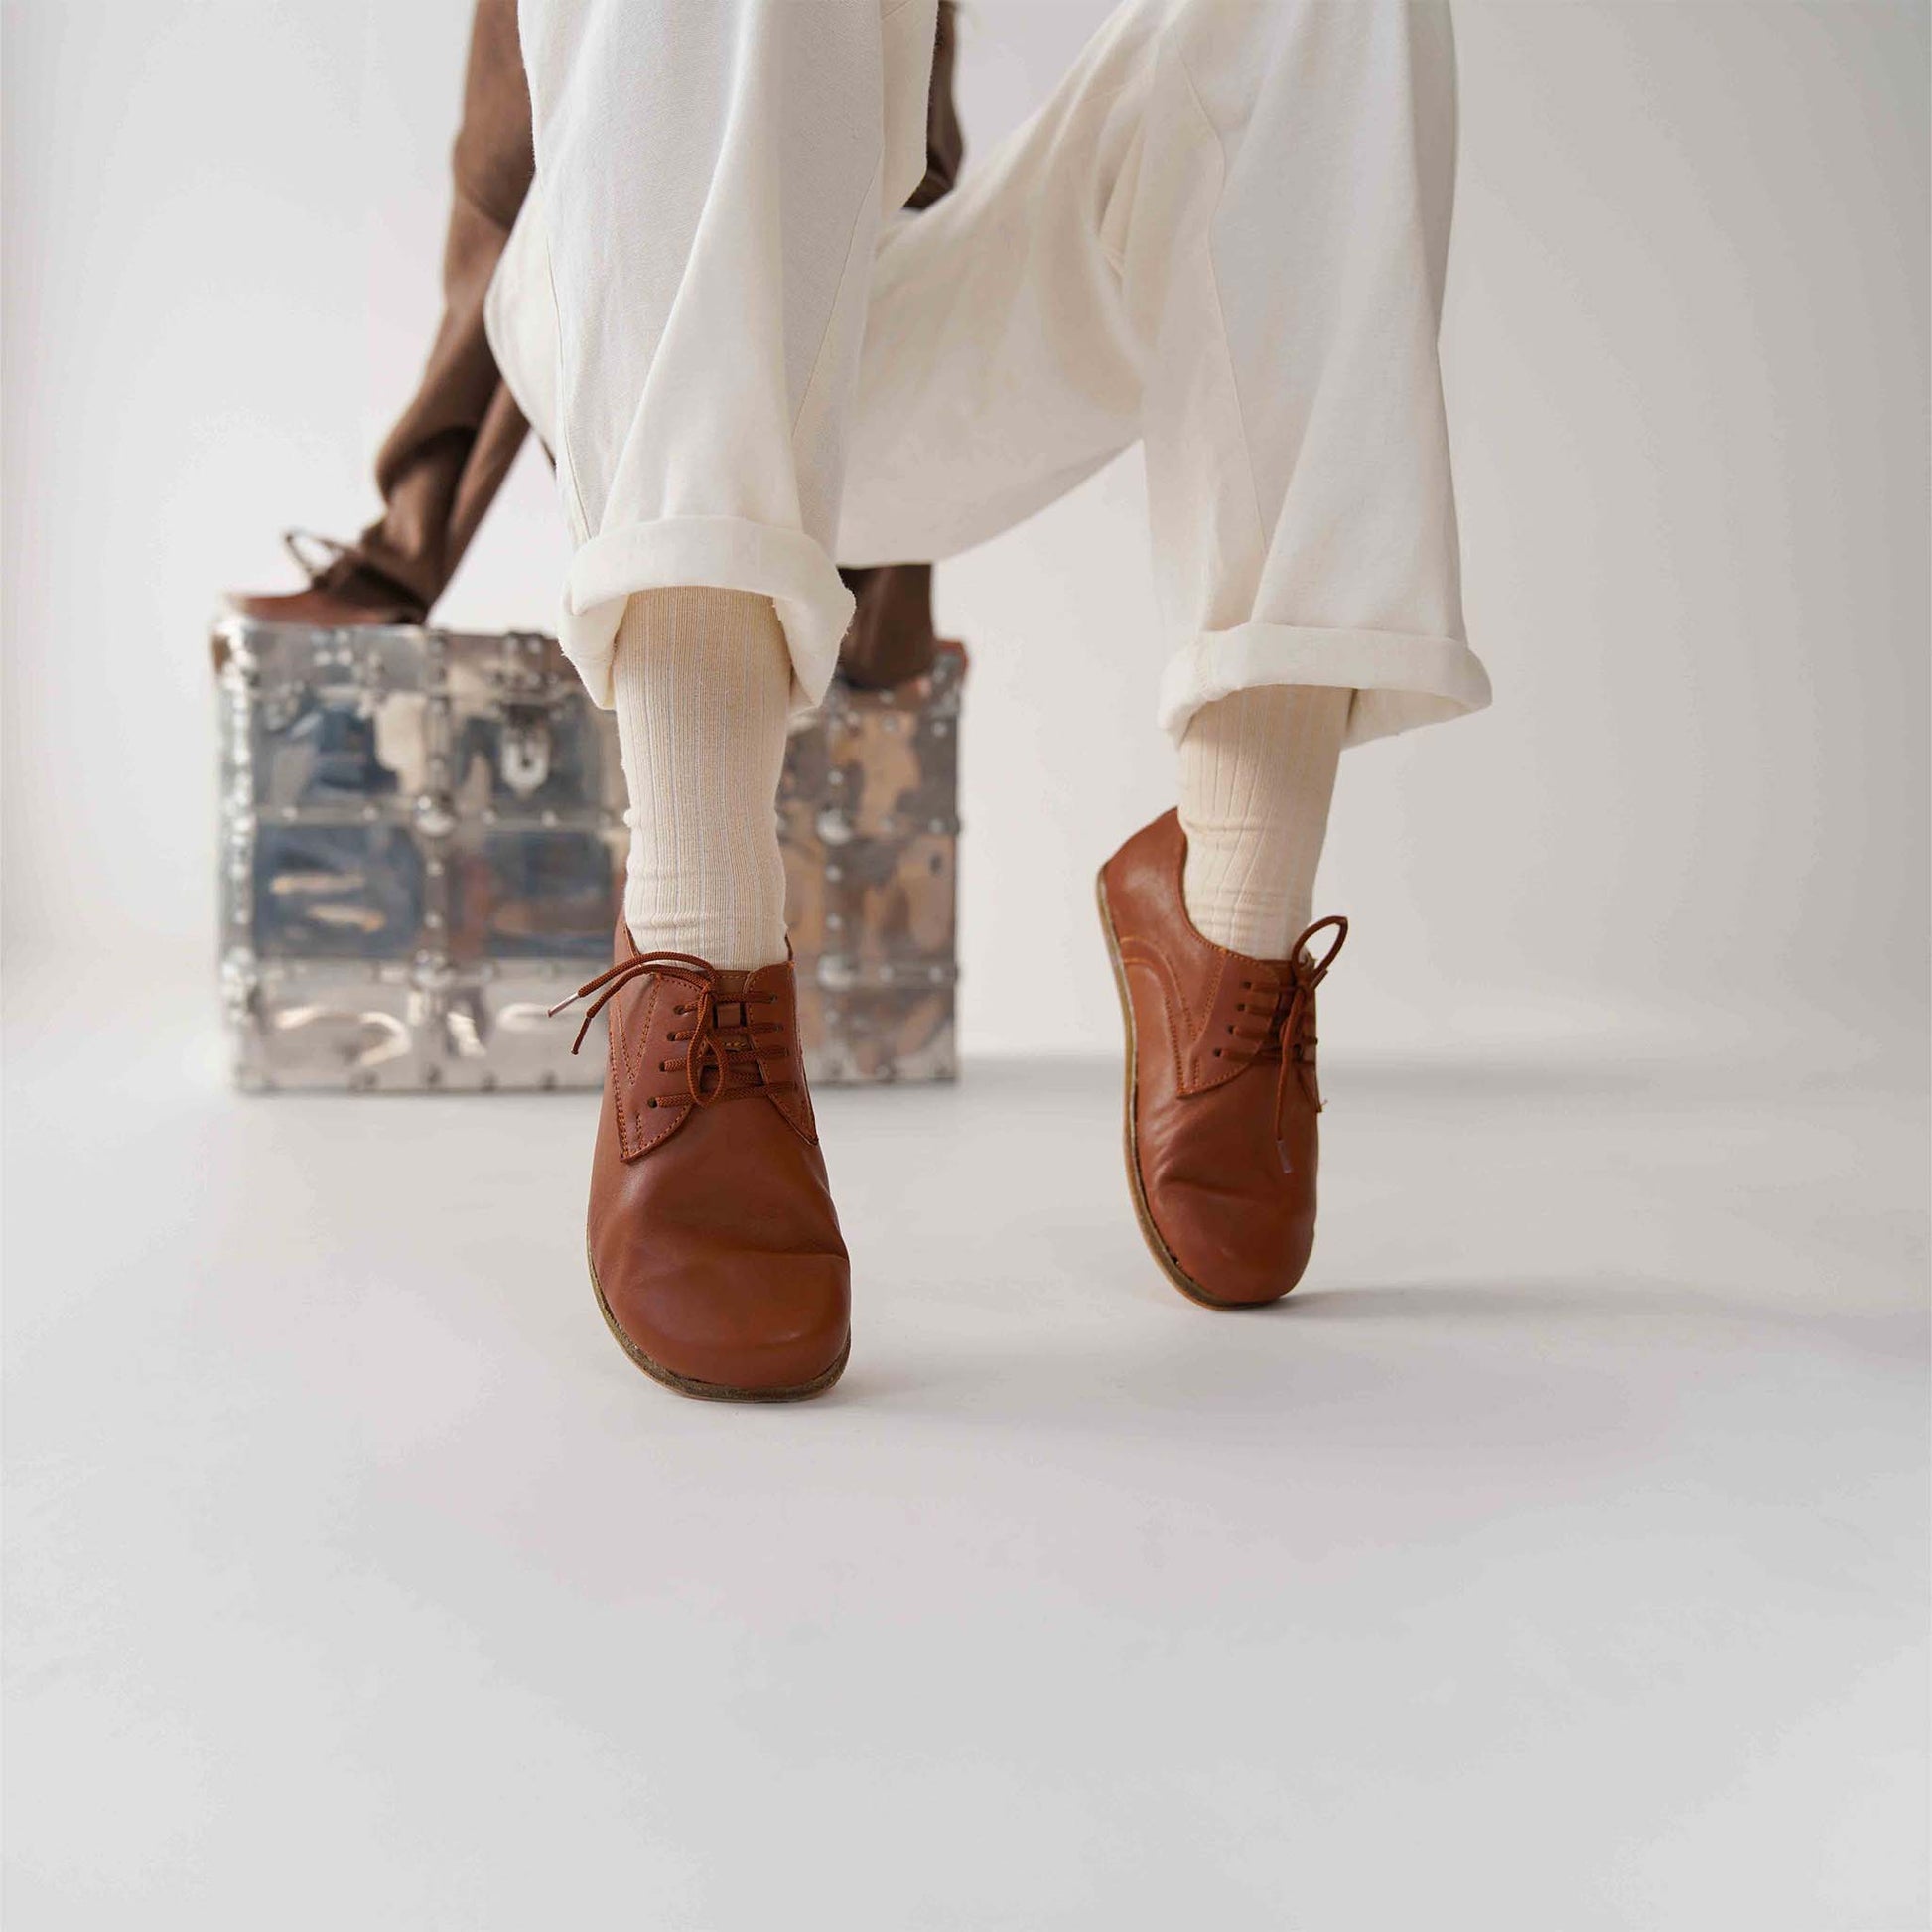 Tan brown leather barefoot women Oxfords styled with white pants, showcasing a minimalist and elegant look for casual wear.